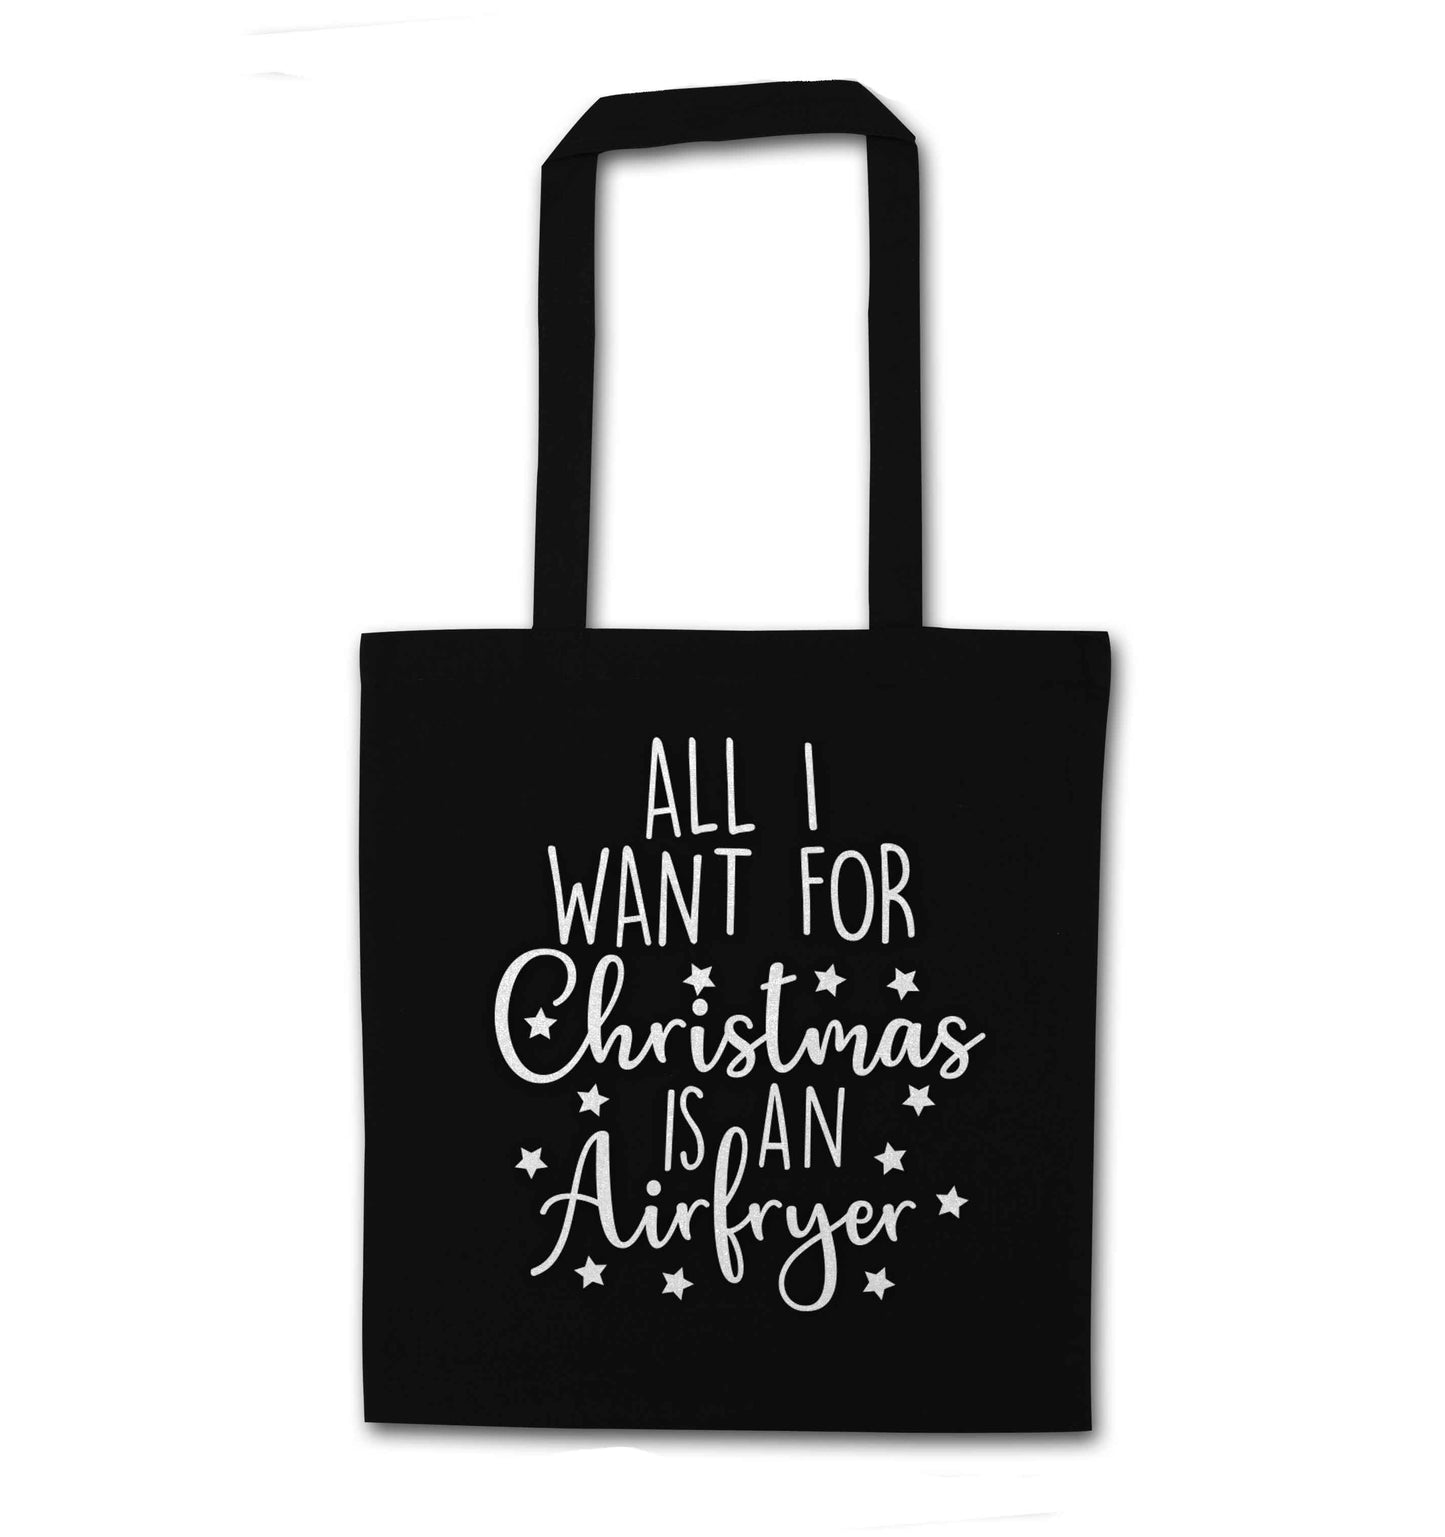 All I want for Christmas is an airfryerblack tote bag